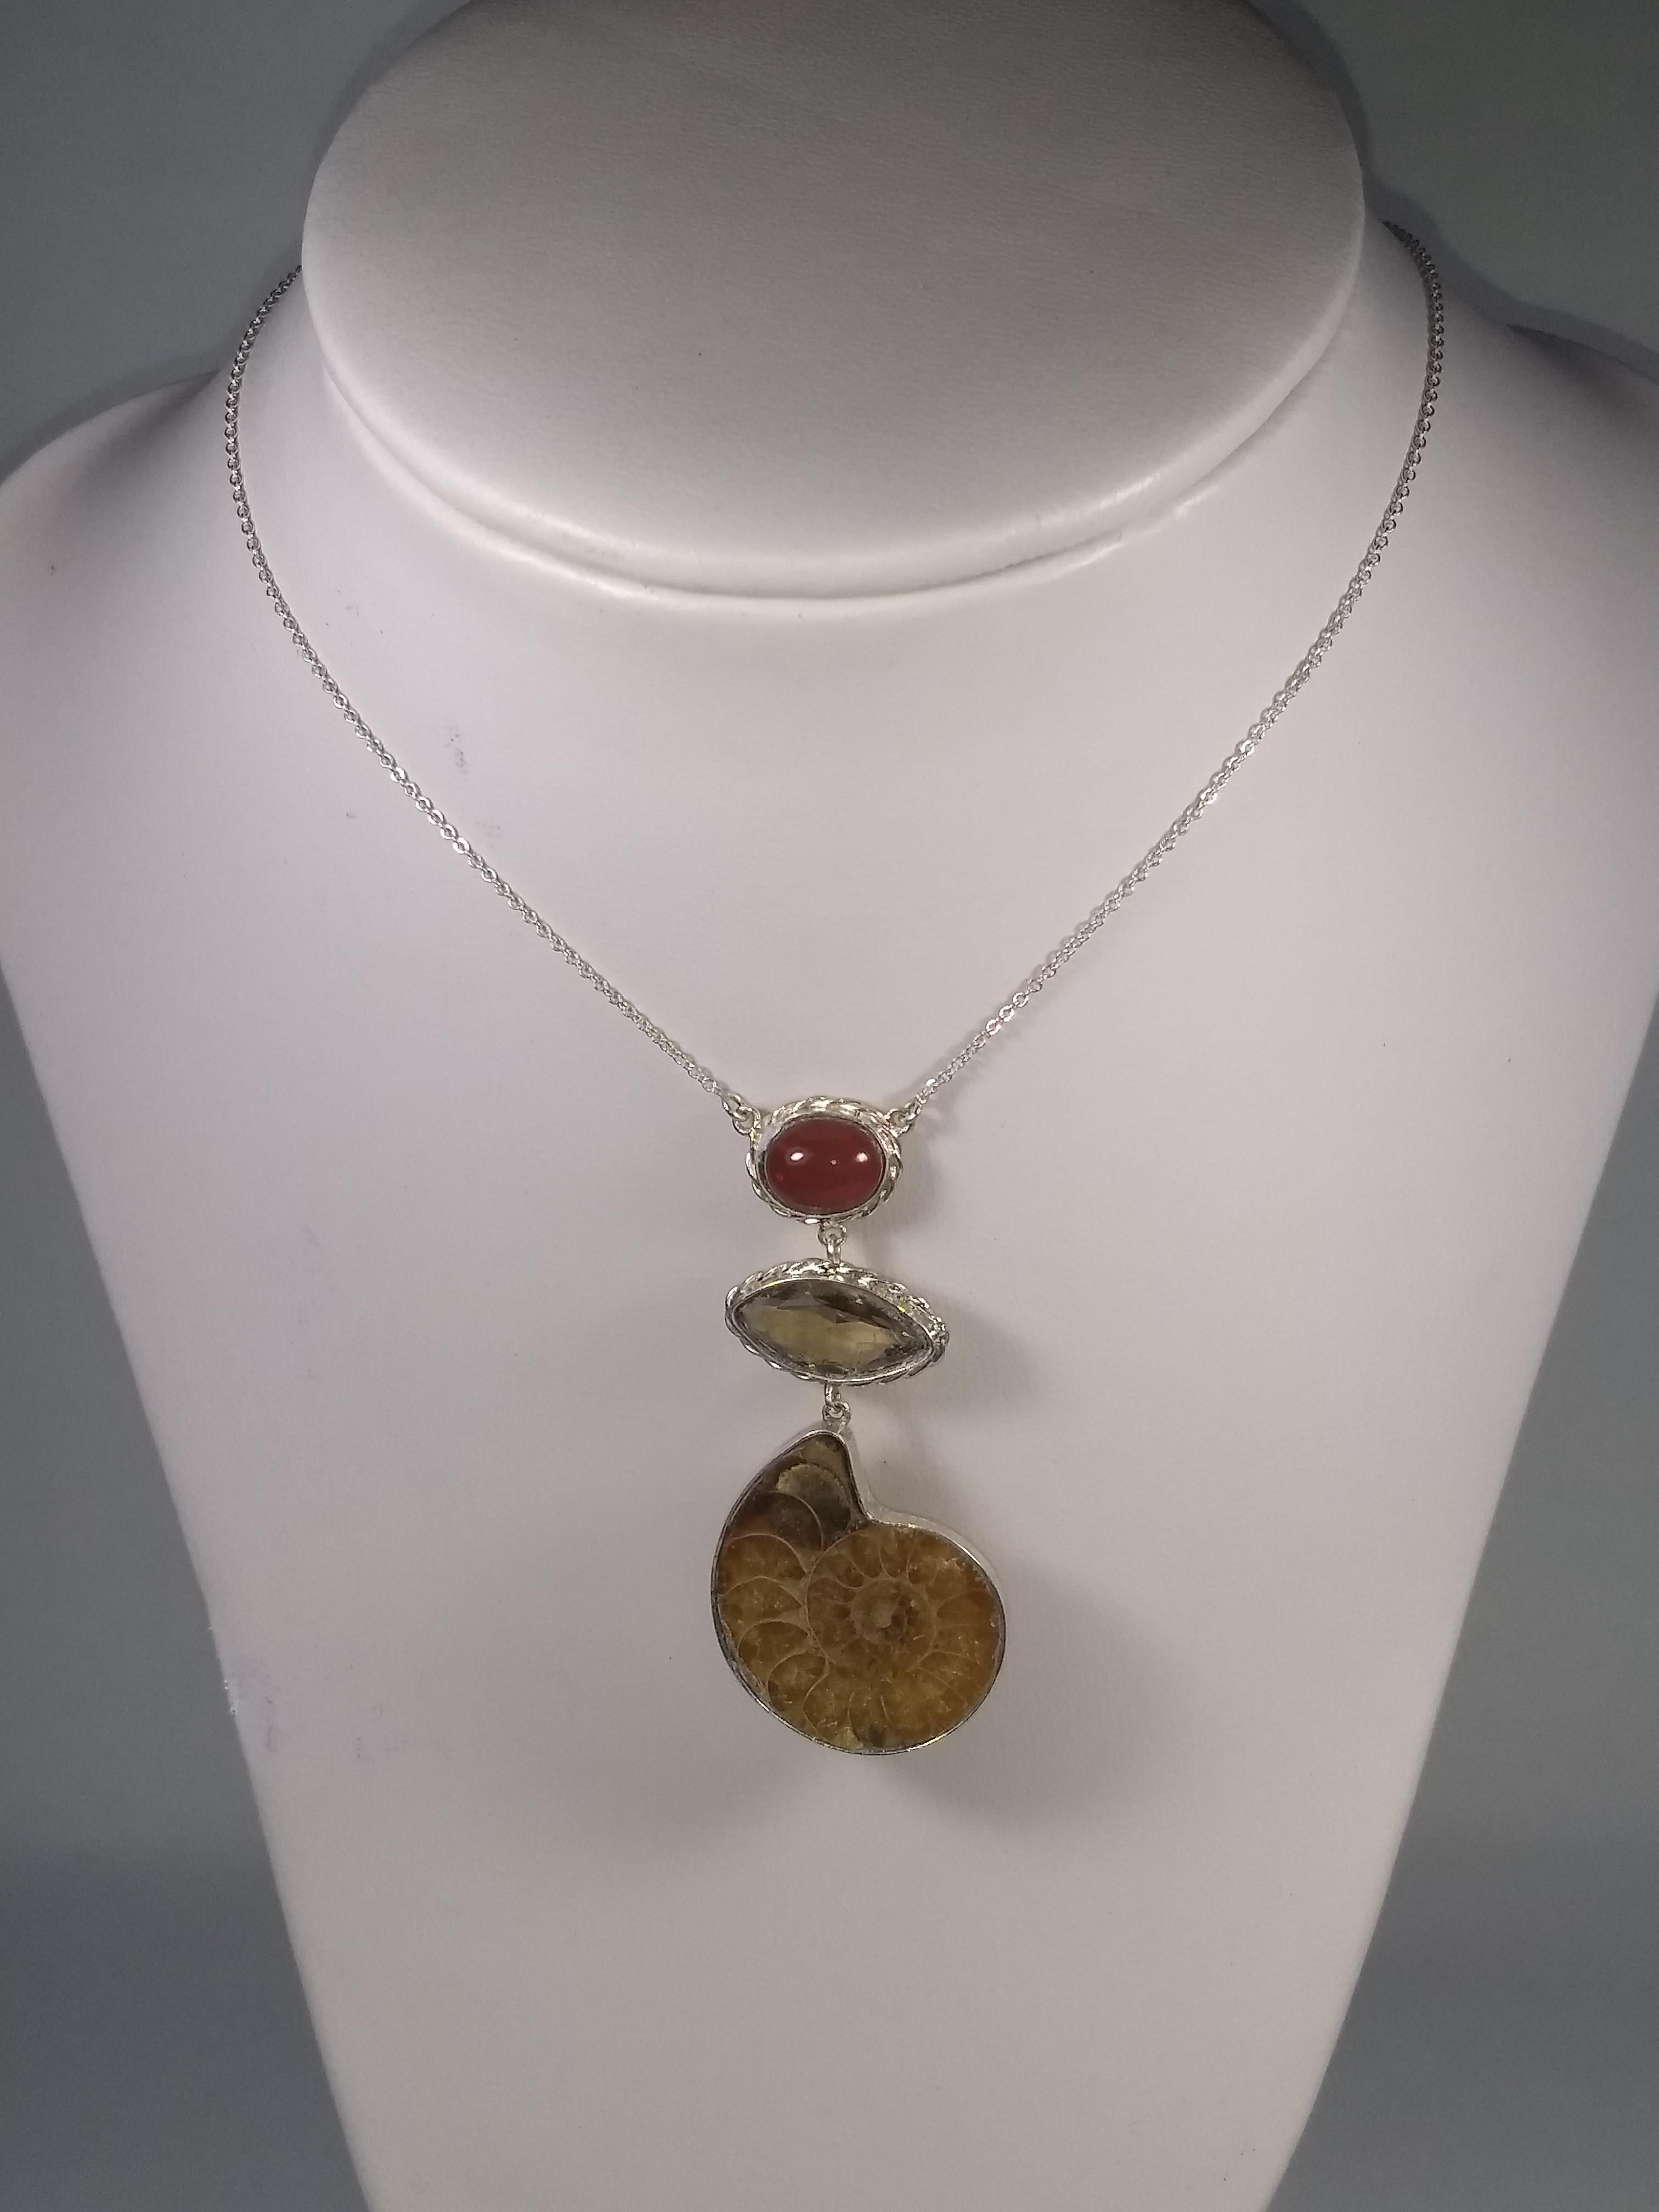 This Alberto Juan one of a kind necklace was handmade from sterling silver, Mexican fire opal (2.5 carats), marquise shaped smoky quartz (4.5 carats) , and ammonite. The chain and findings used in this piece are sterling silver. Necklace measures